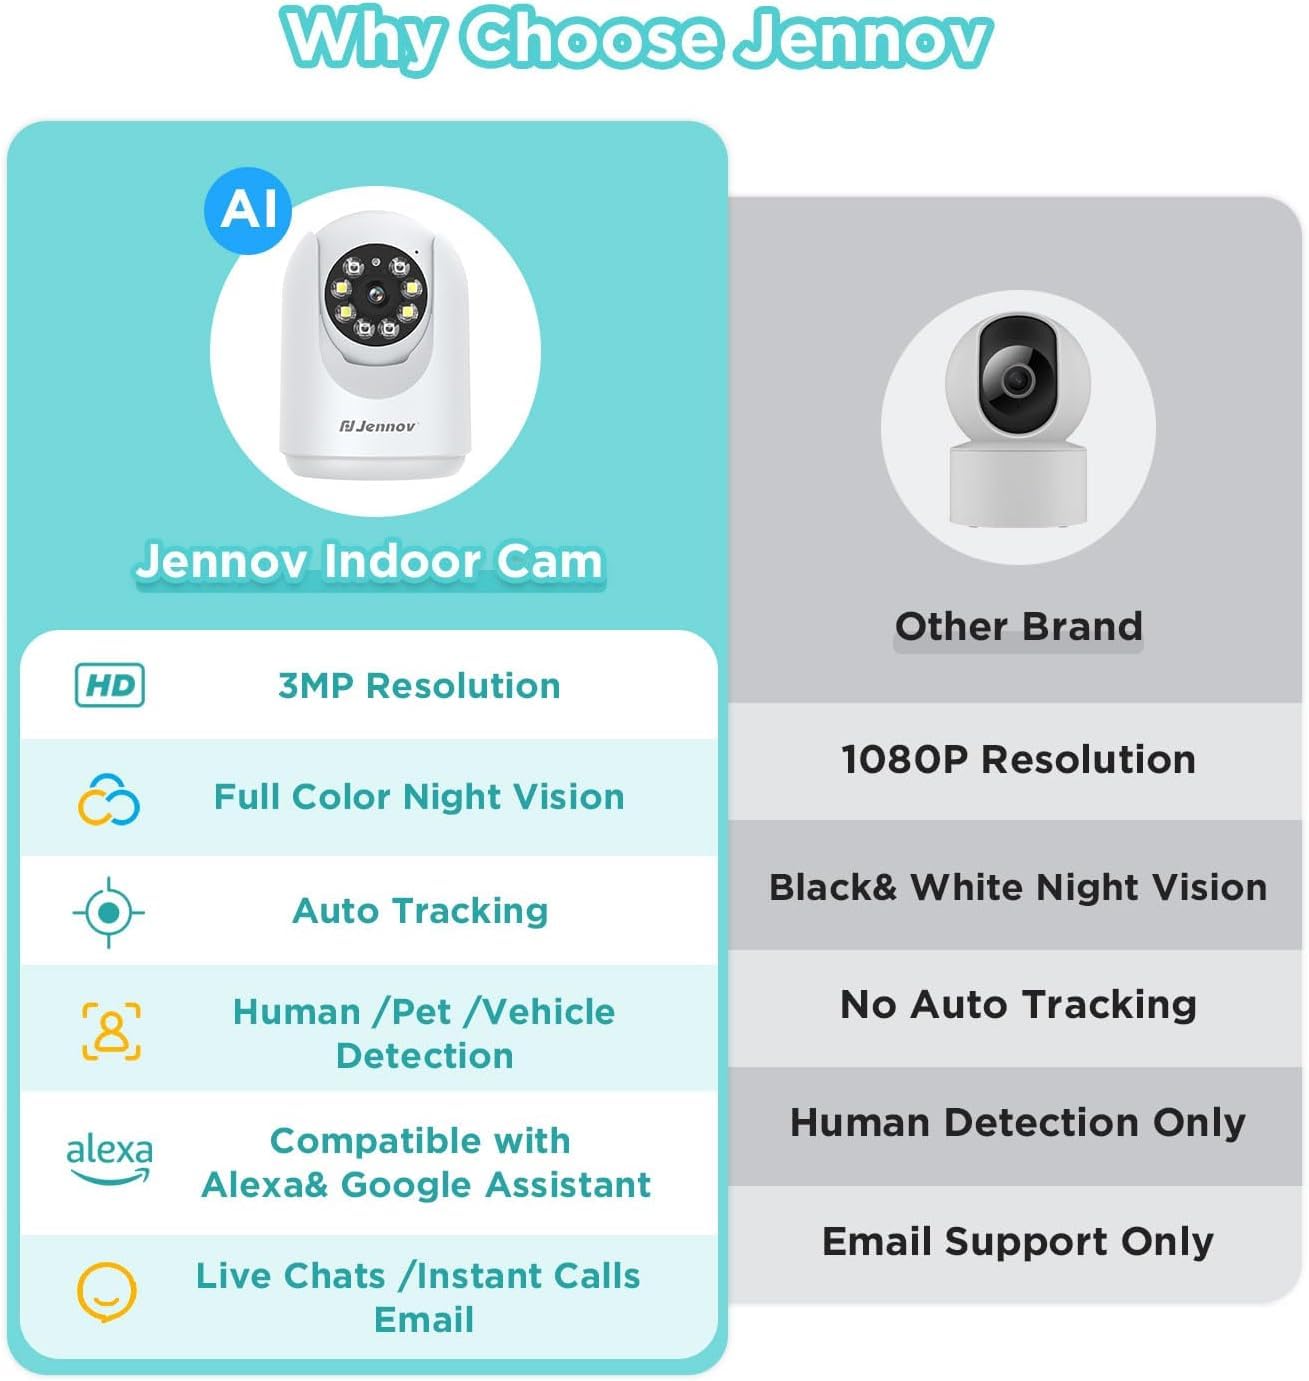 Jennov 2K Pan/Tilt Indoor Cameras for Home Security - 2.4 GHz Pet Dog Camera with Phone App, WiFi Baby Camera Monitor, Color Night Vision, Motion Detection, Auto Tracking, Compatible with Alexa